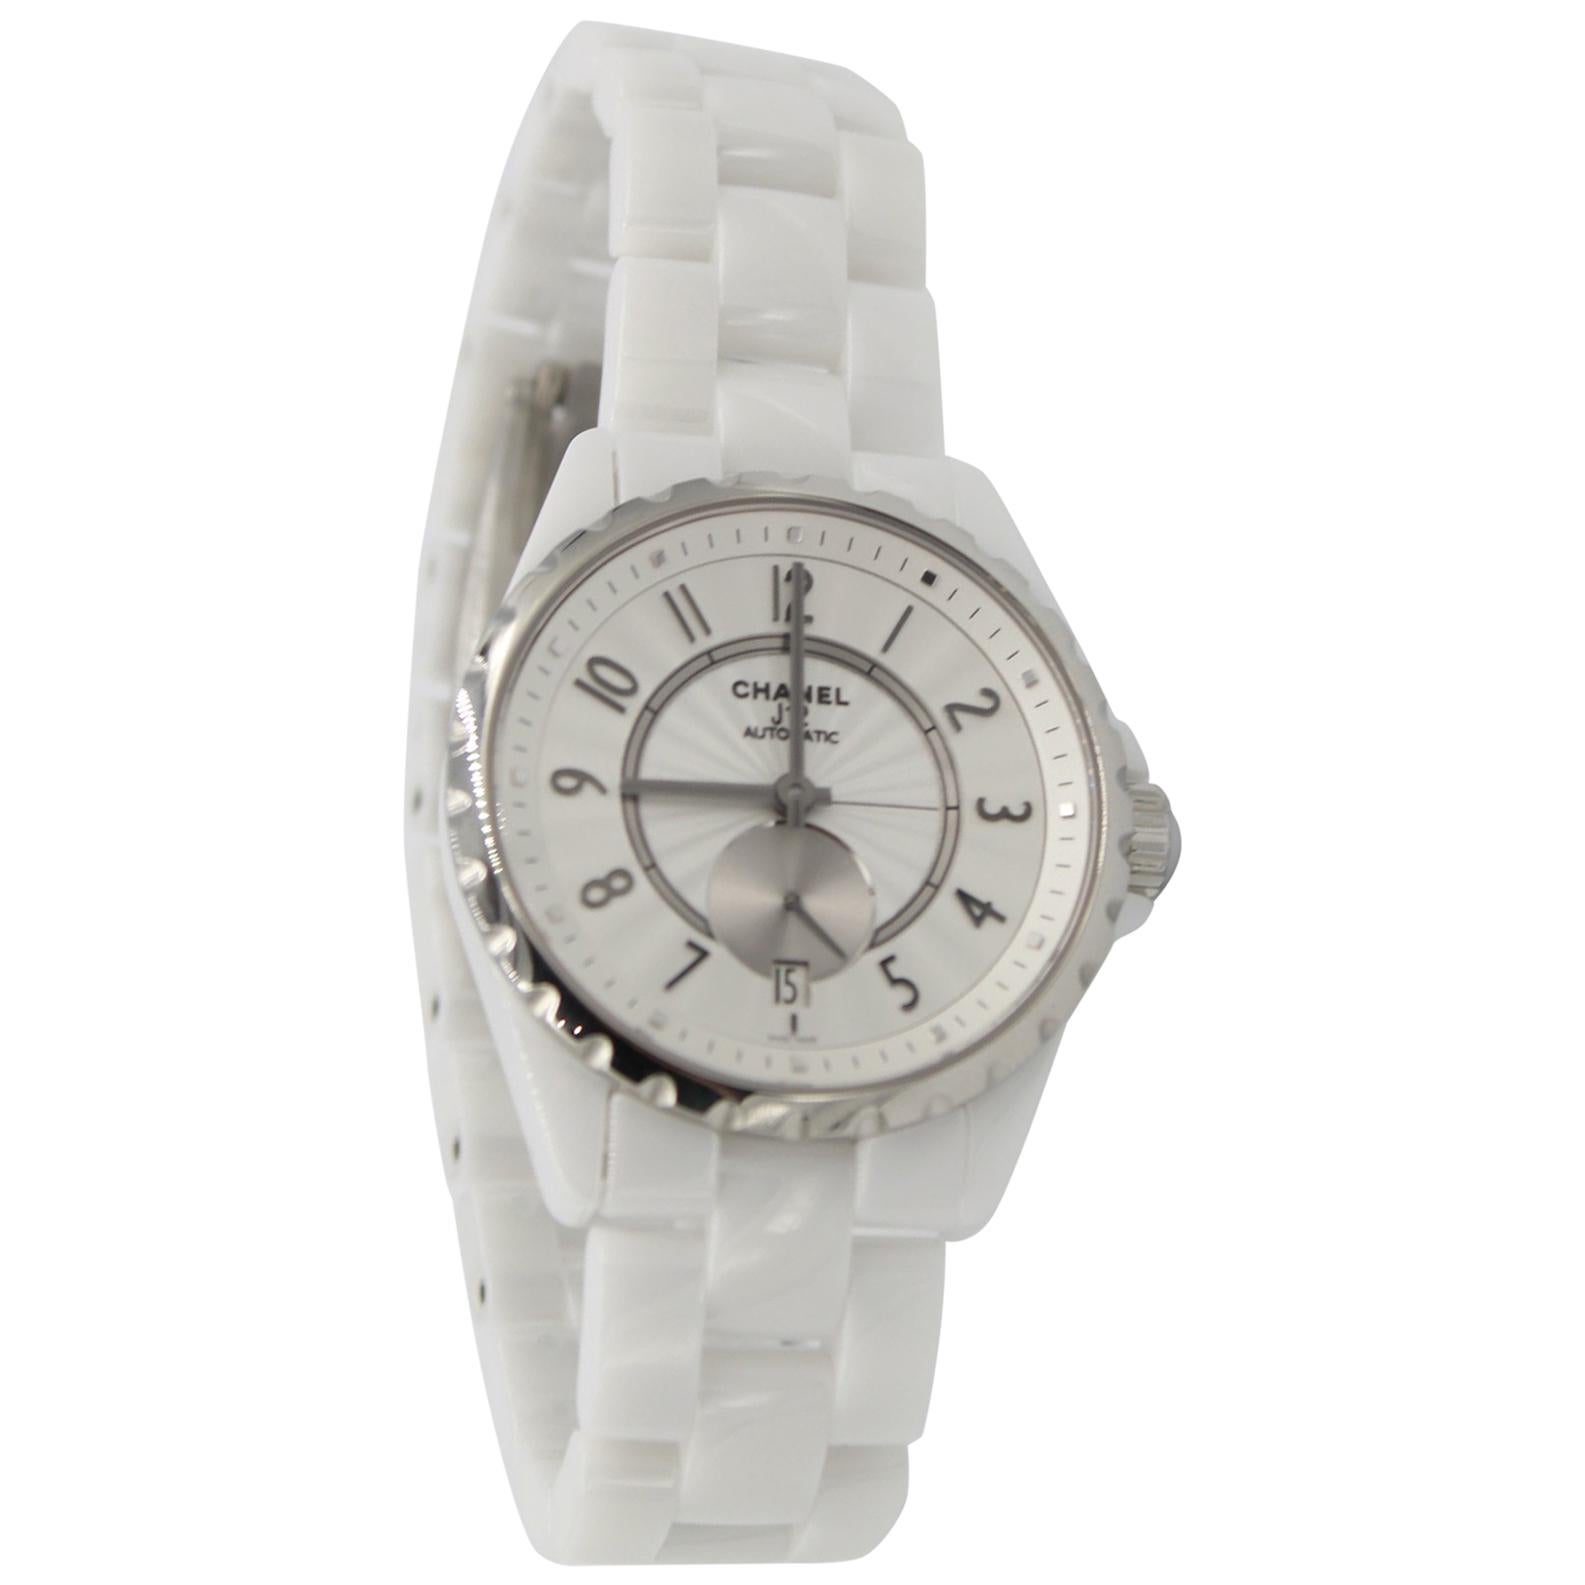 Chanel watch J12 in white ceramic For Sale